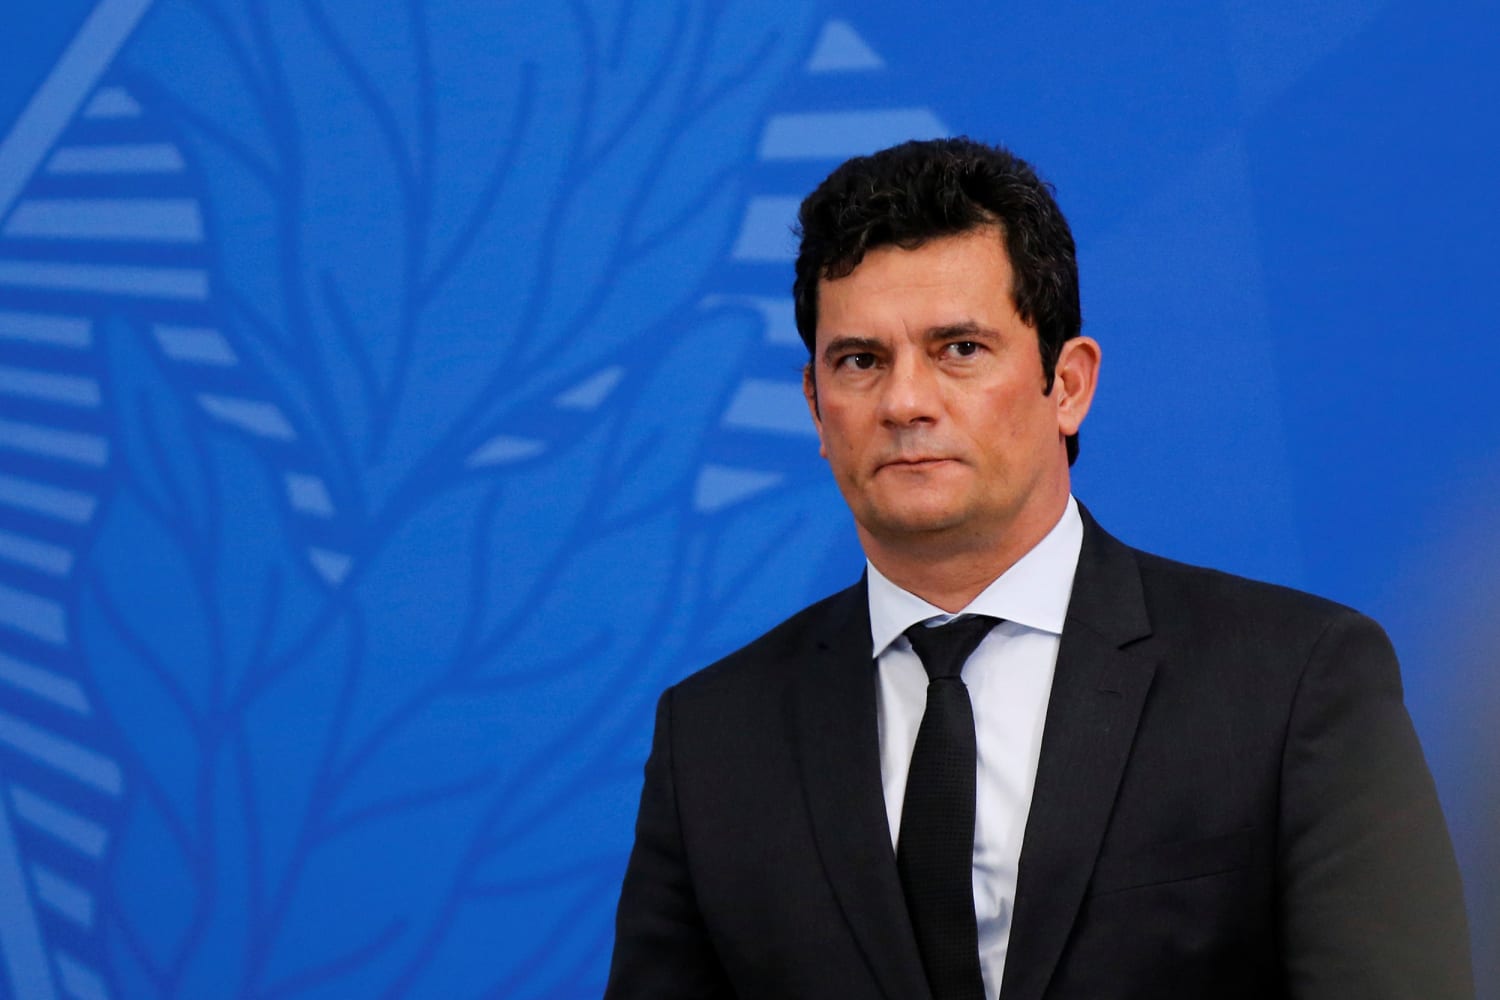 Brazils justice minister resigns, accuses President Bolsonaro of meddling with police hq pic